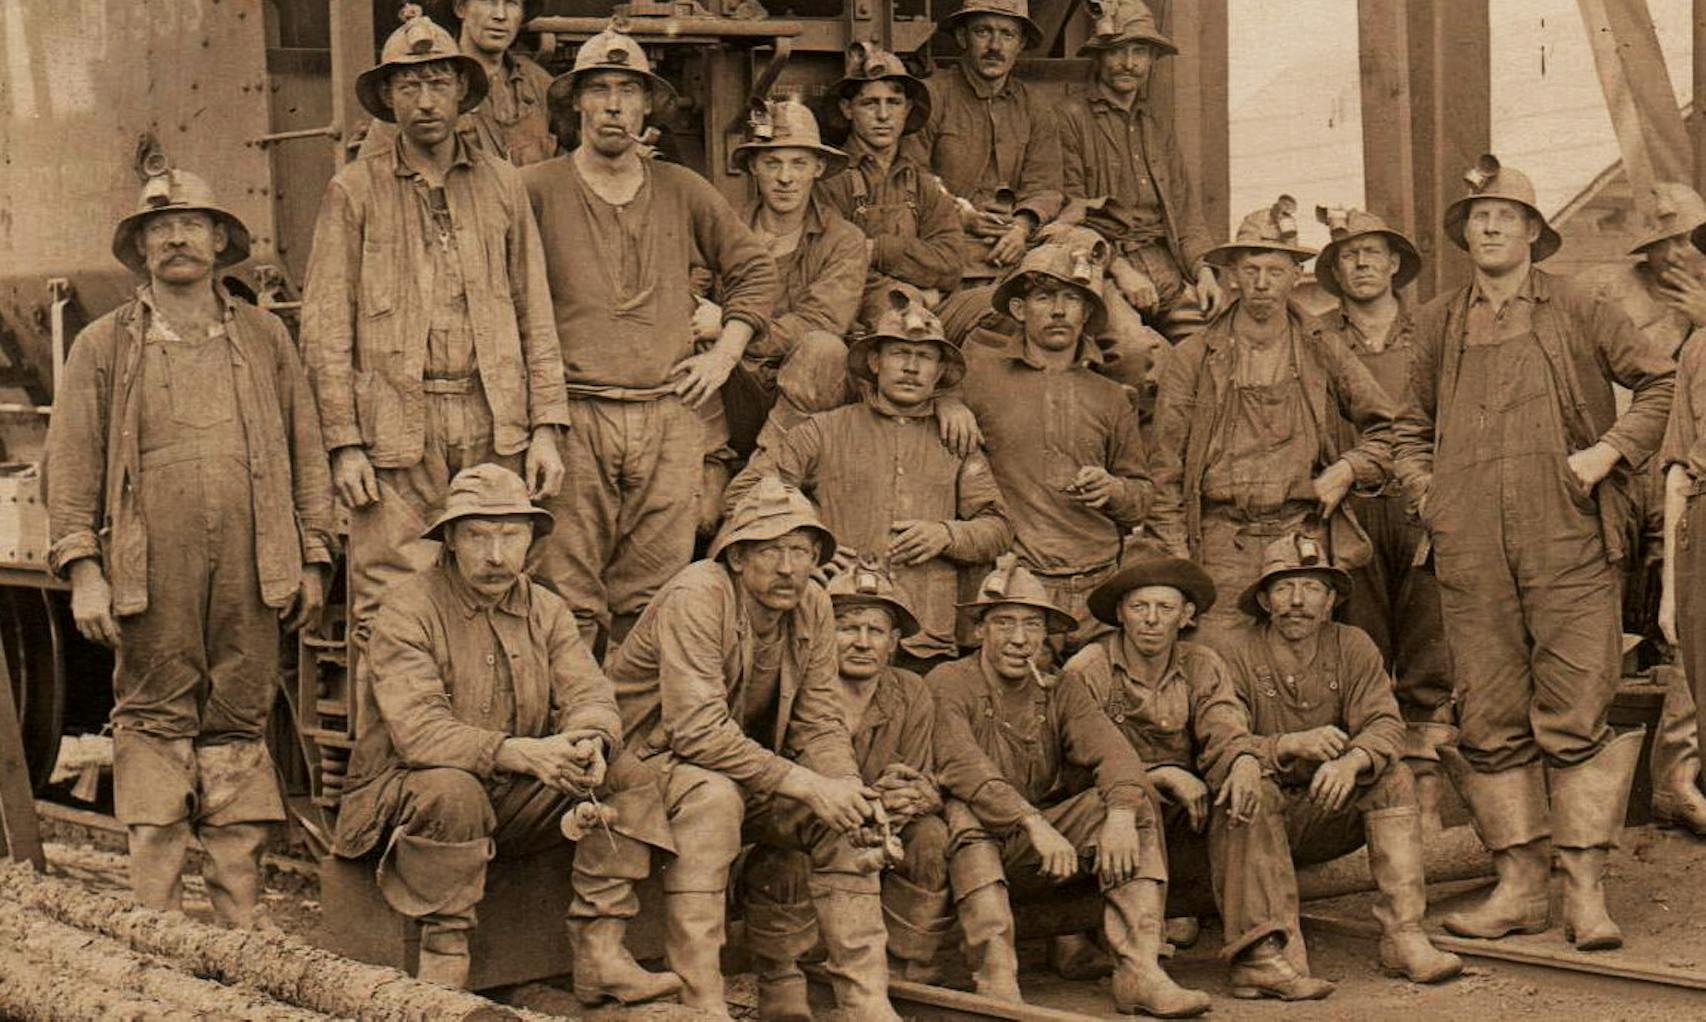 Miners gathered at the Portsmouth Mine. Date unknown.